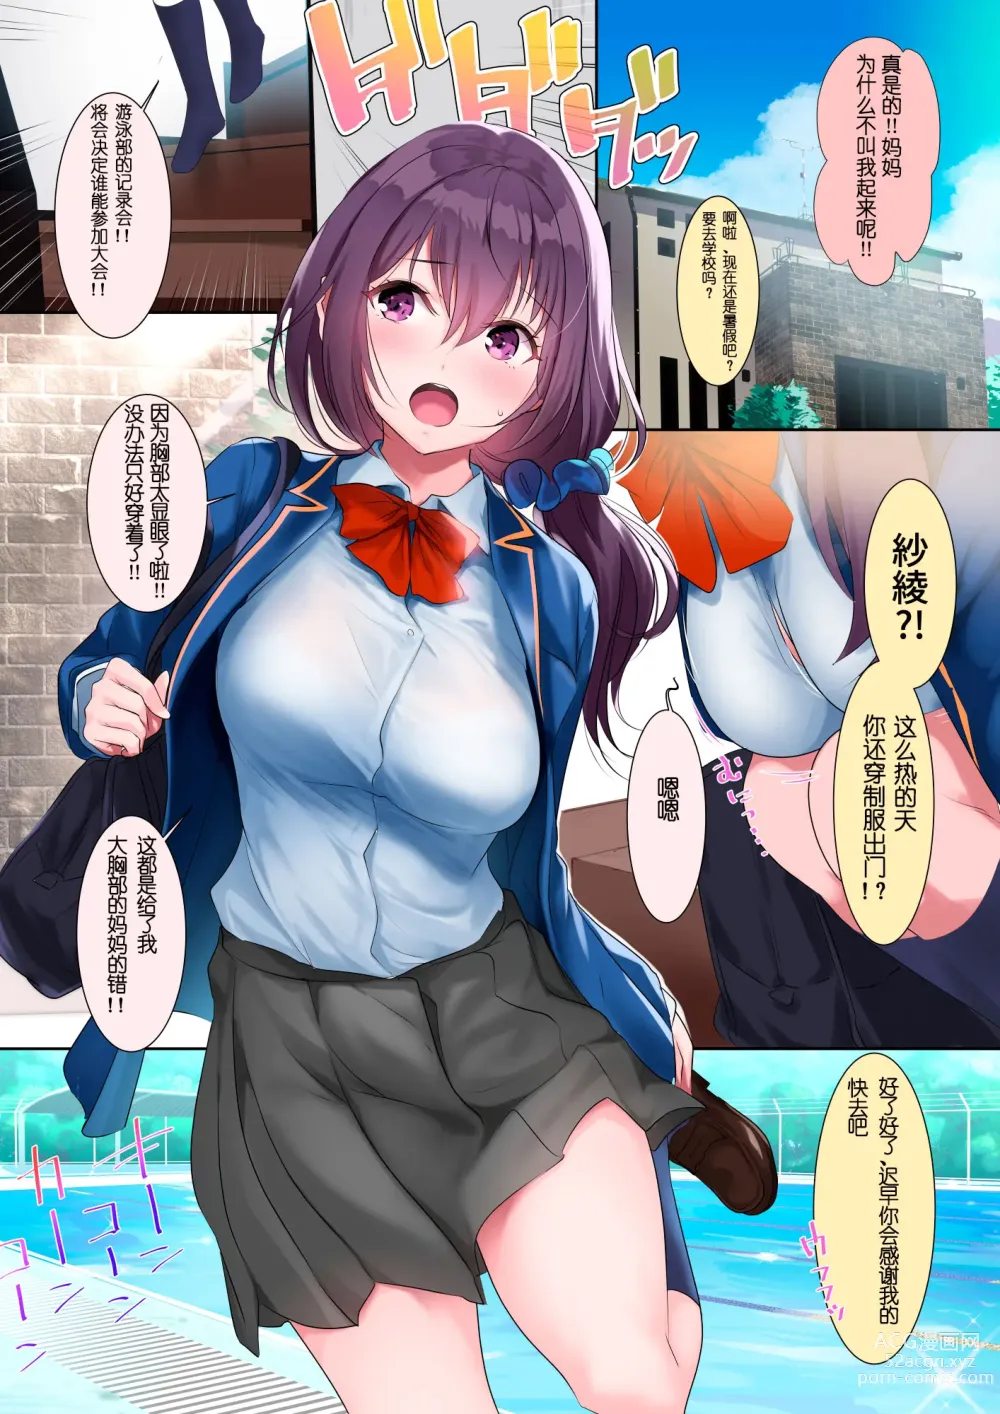 Page 6 of doujinshi 巨乳が悩みの水泳部員